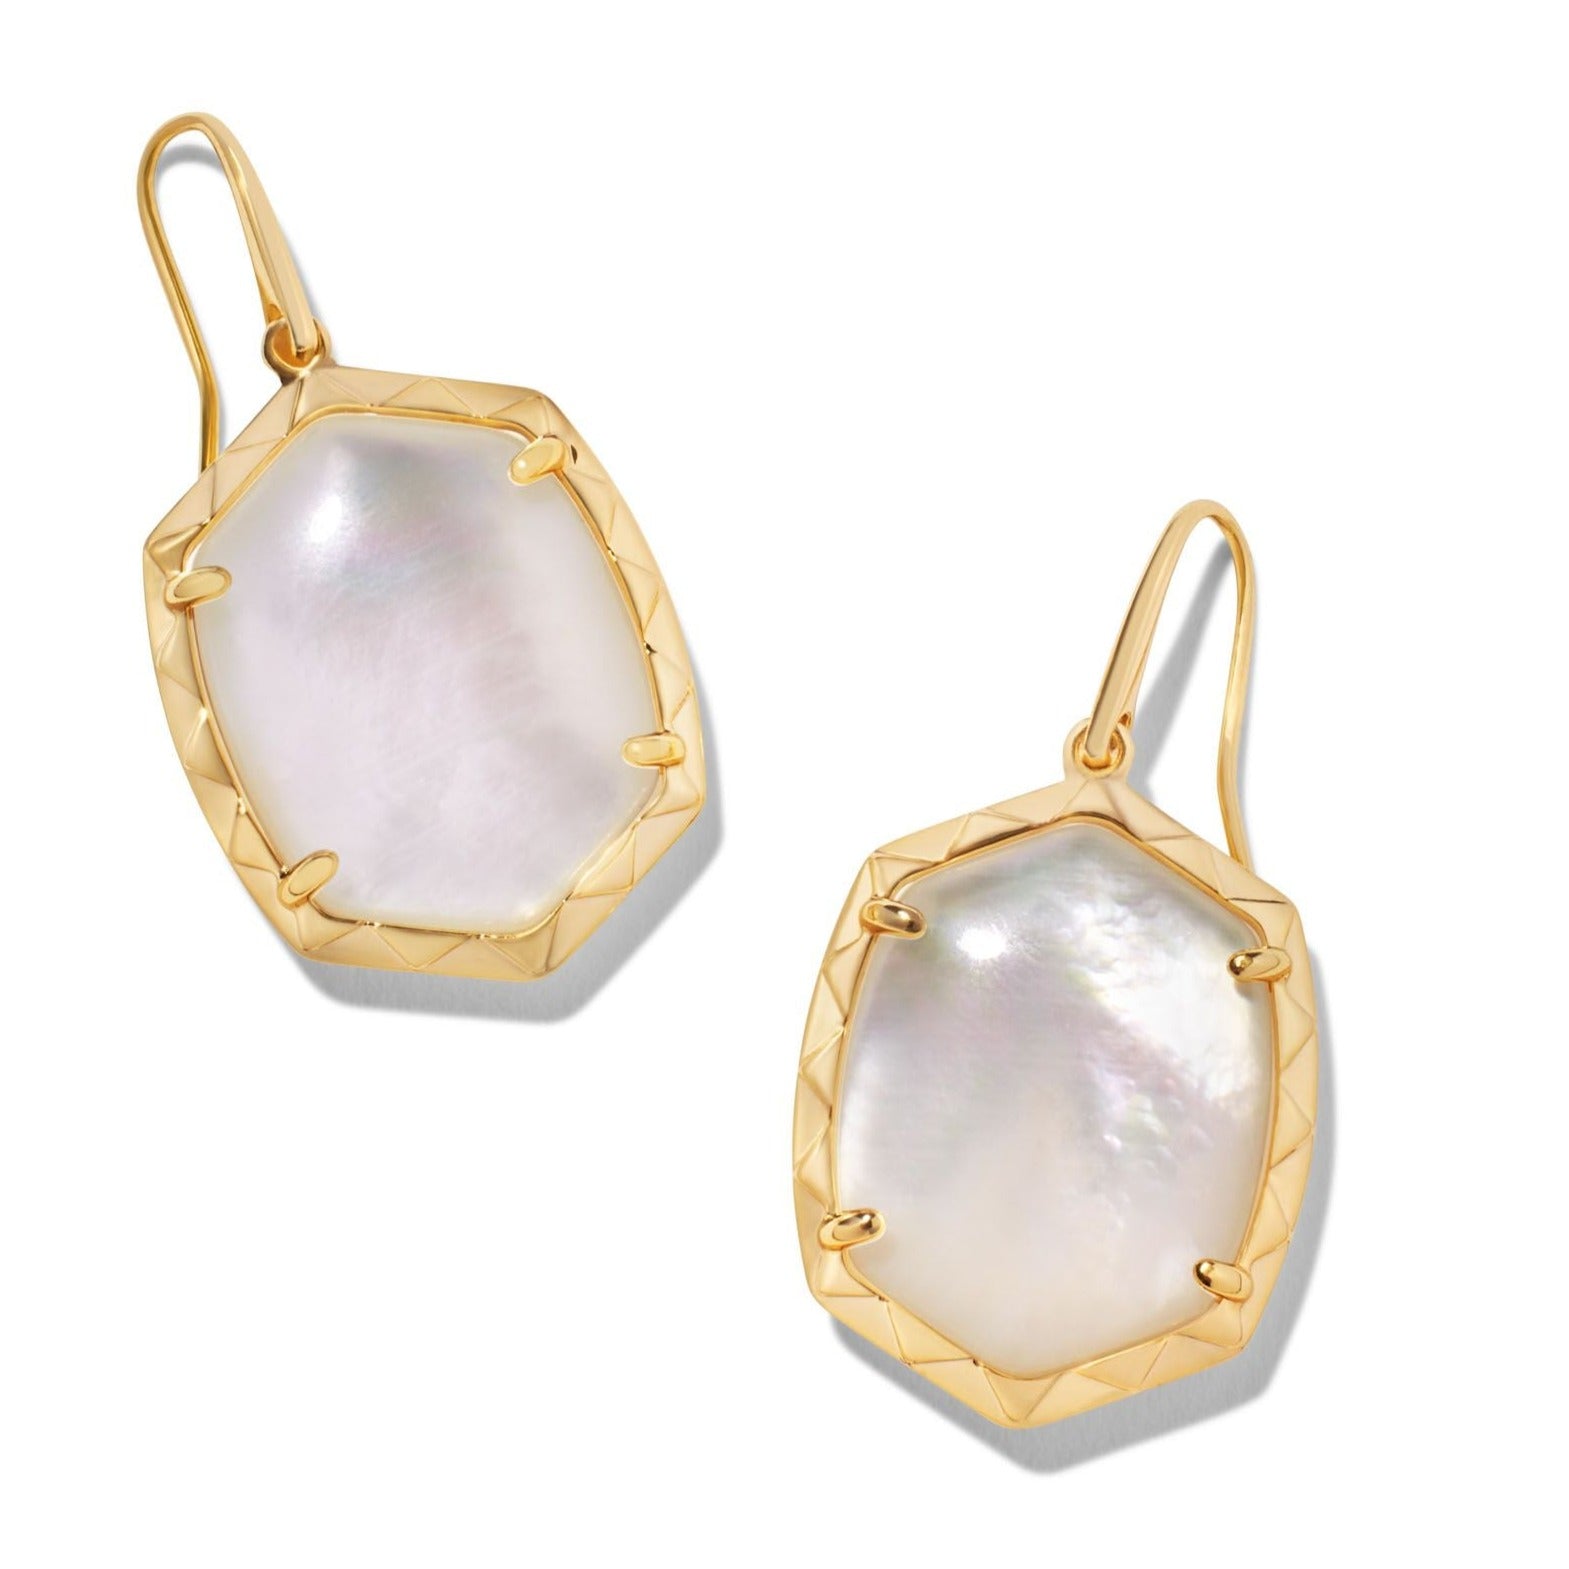 Kendra Scott | Daphne Gold Drop Earrings in Ivory Mother of Pearl - Giddy Up Glamour Boutique